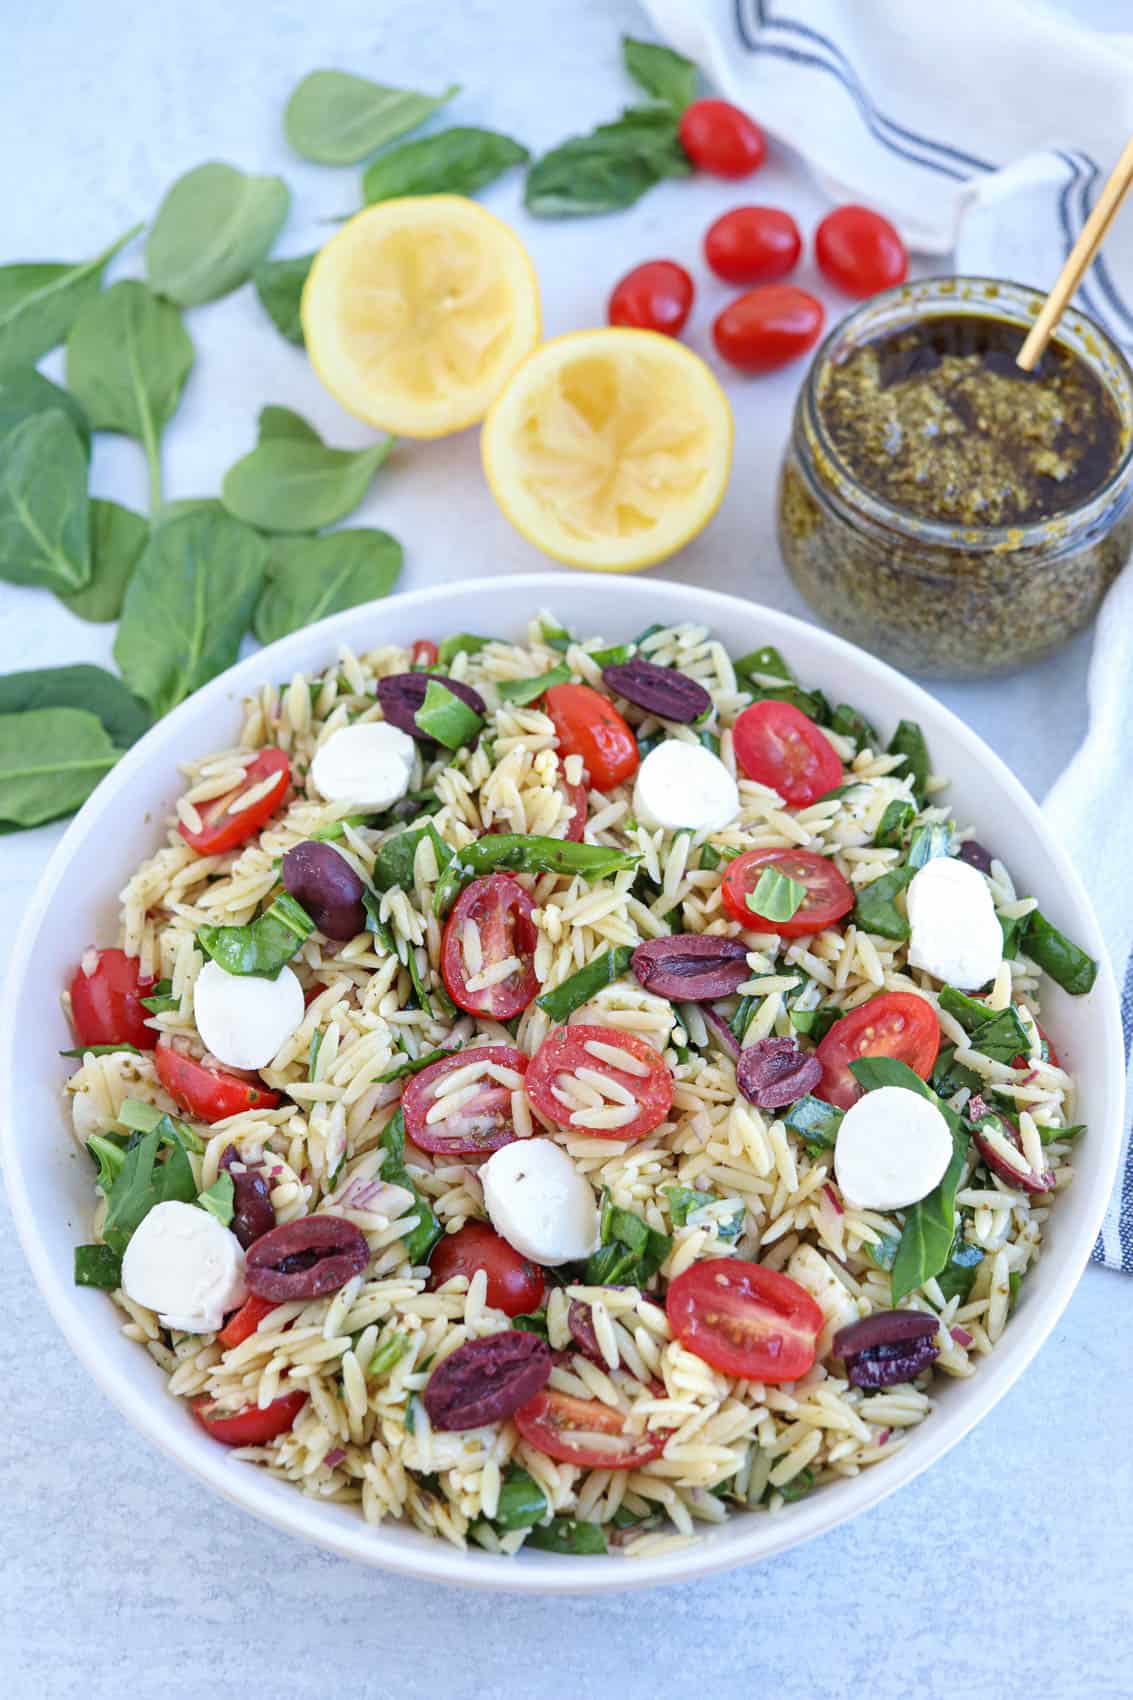 orzo pasta salad with spinach, olives, cherry tomatoes, mozzarella cheese and pesto.